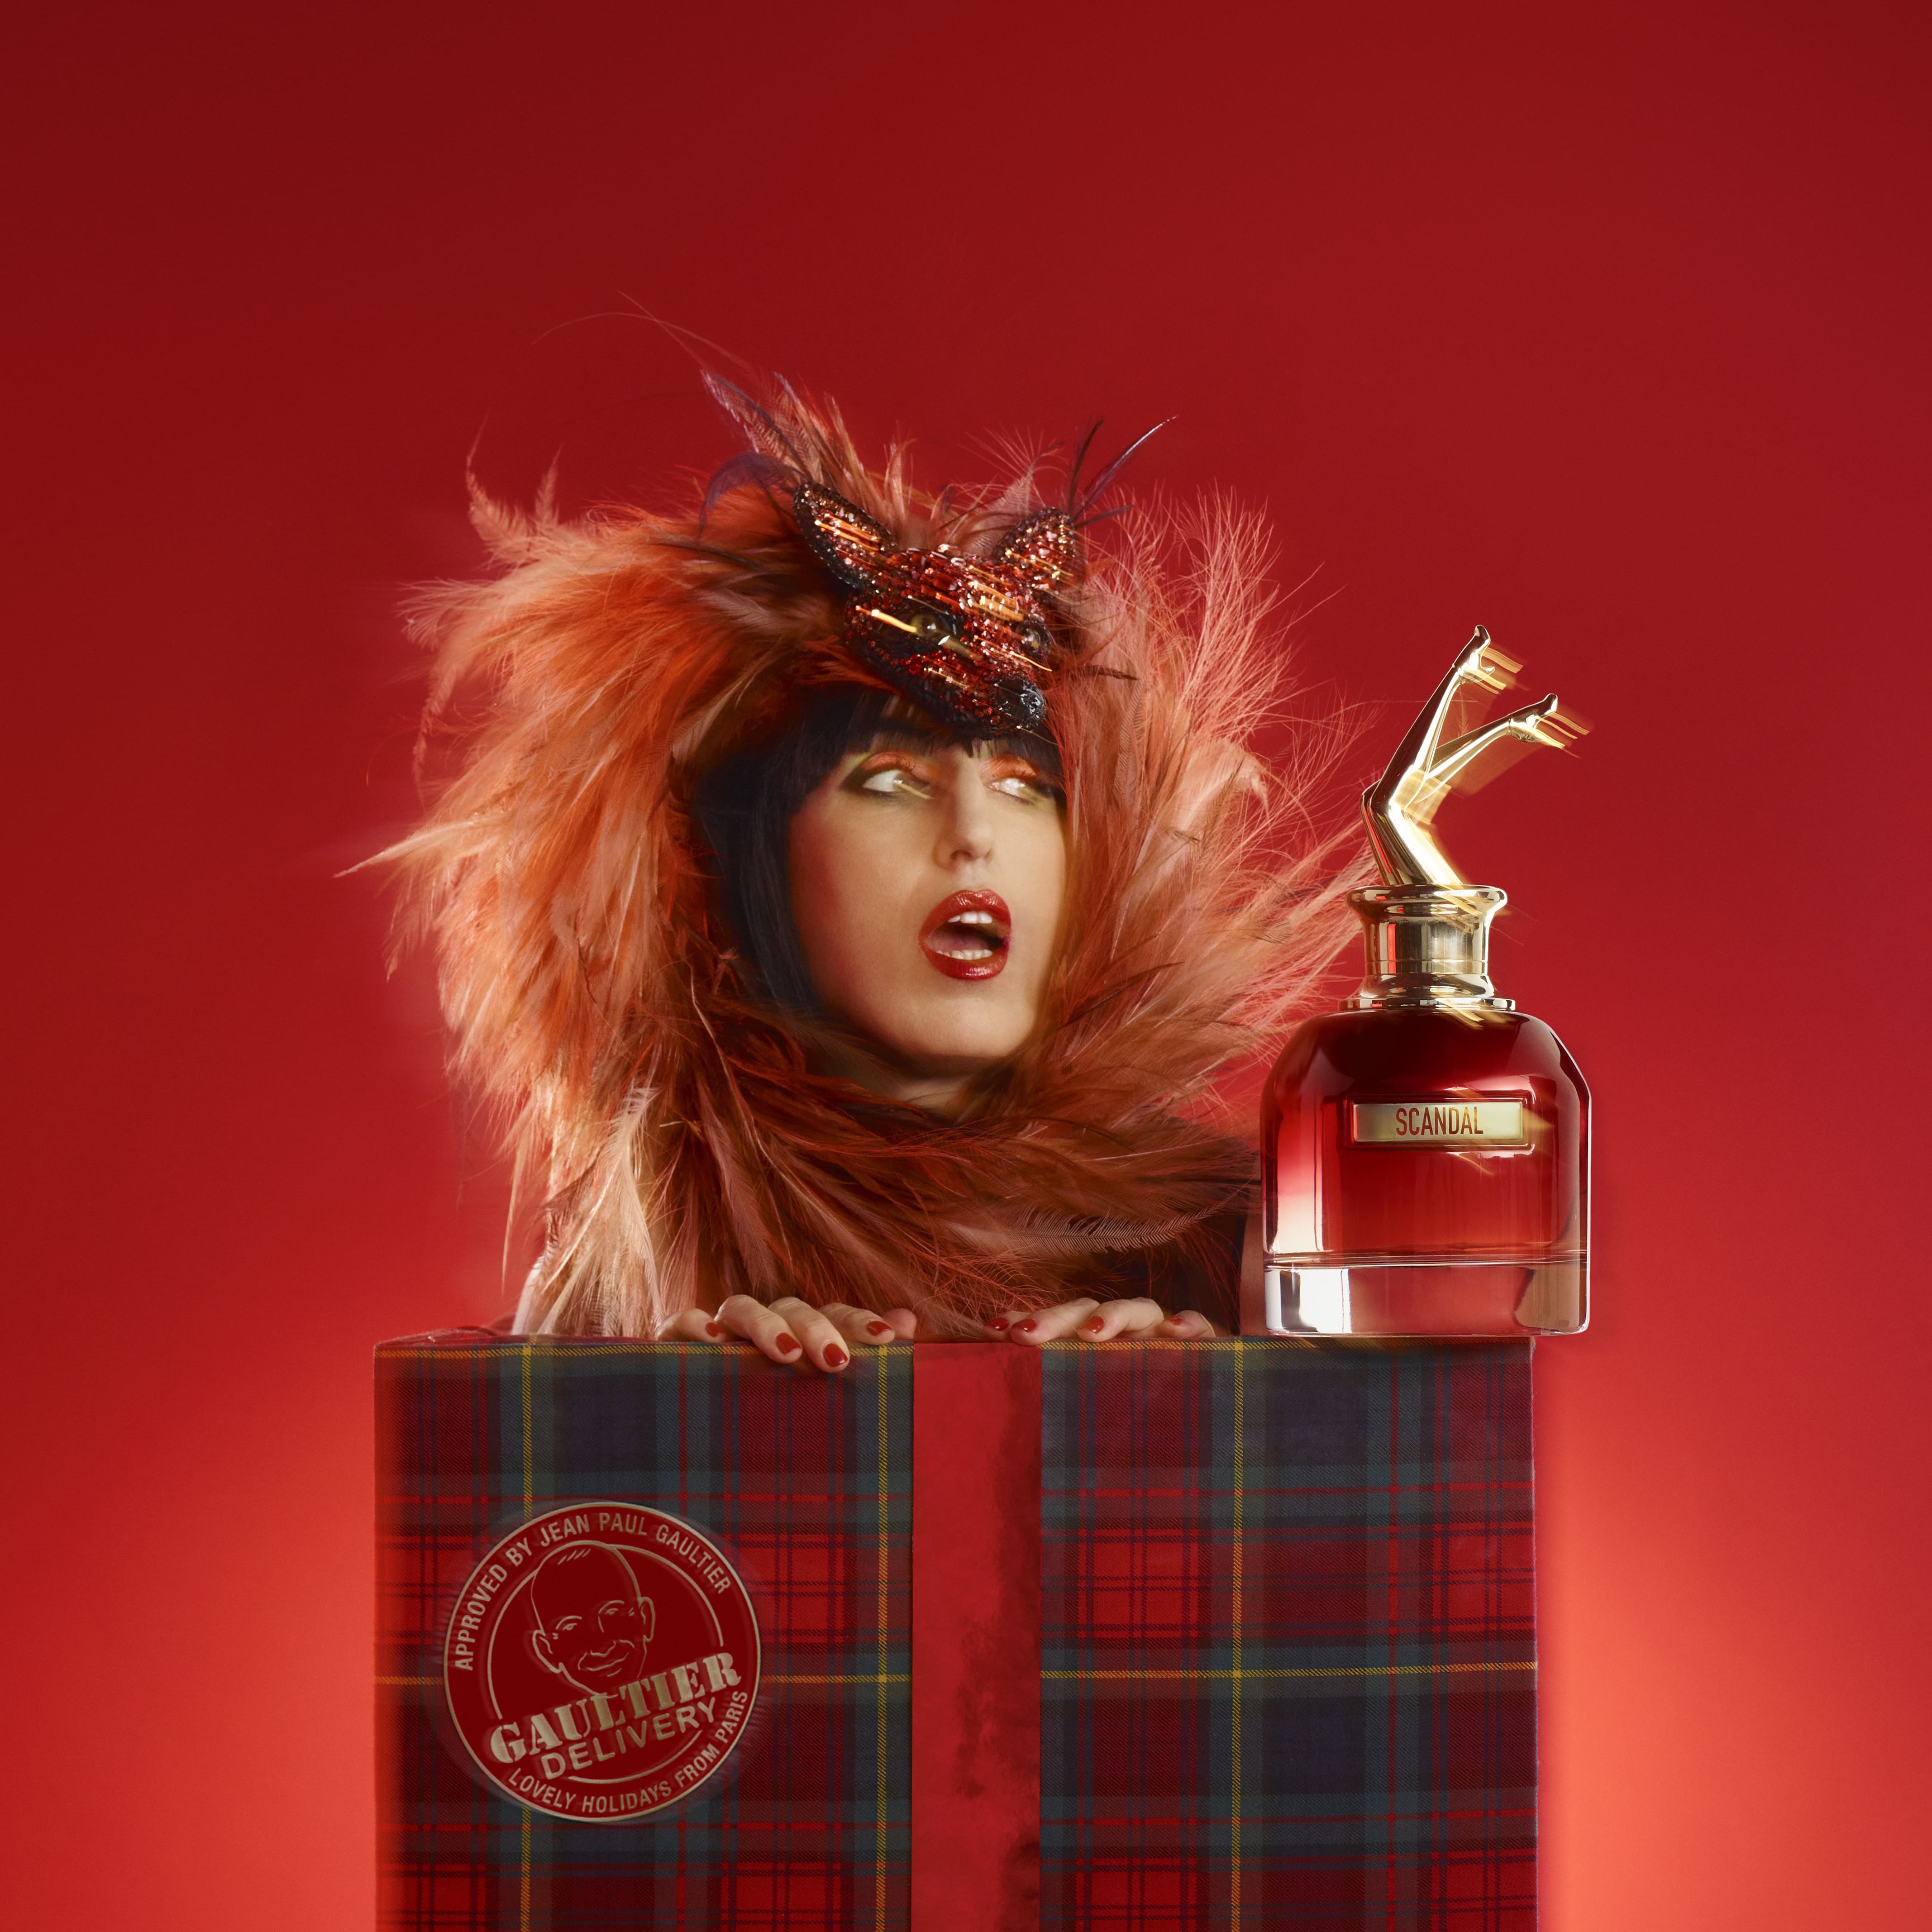 Parasite Snuggle up stimulate Jean Paul Gaultier Christmas Collectors 2020: JPG CRAZY DELIVERY ~  Fragrance News